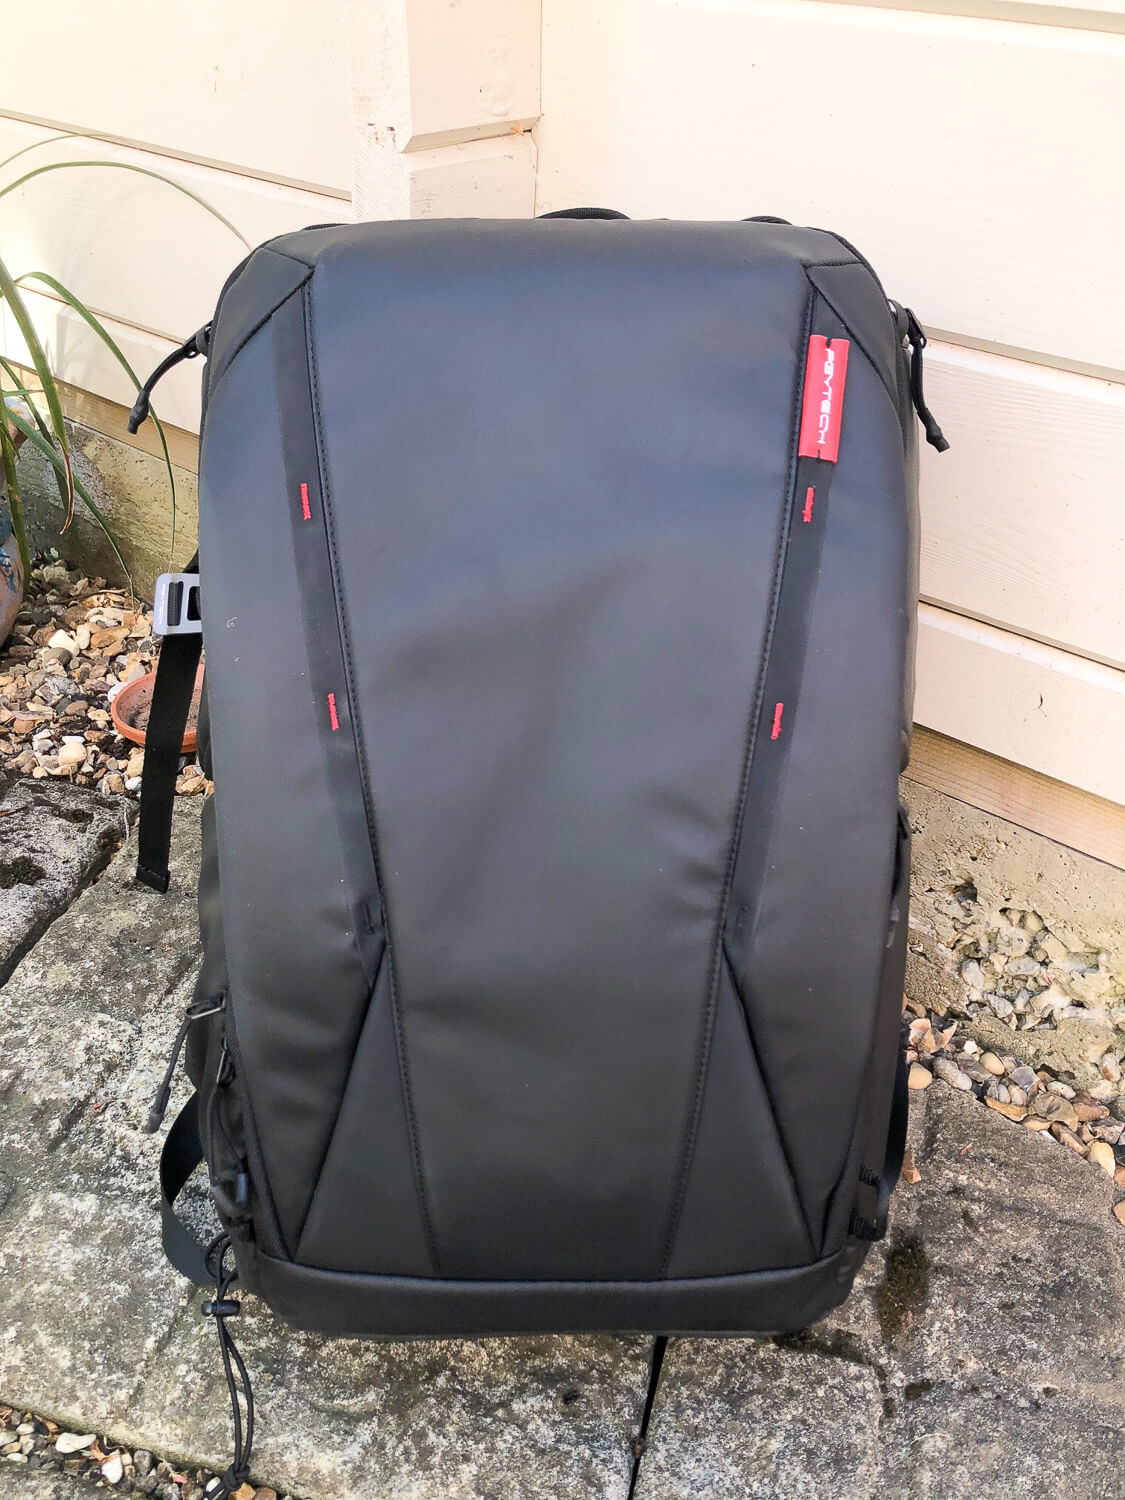 onemo-25l-bag-review-2